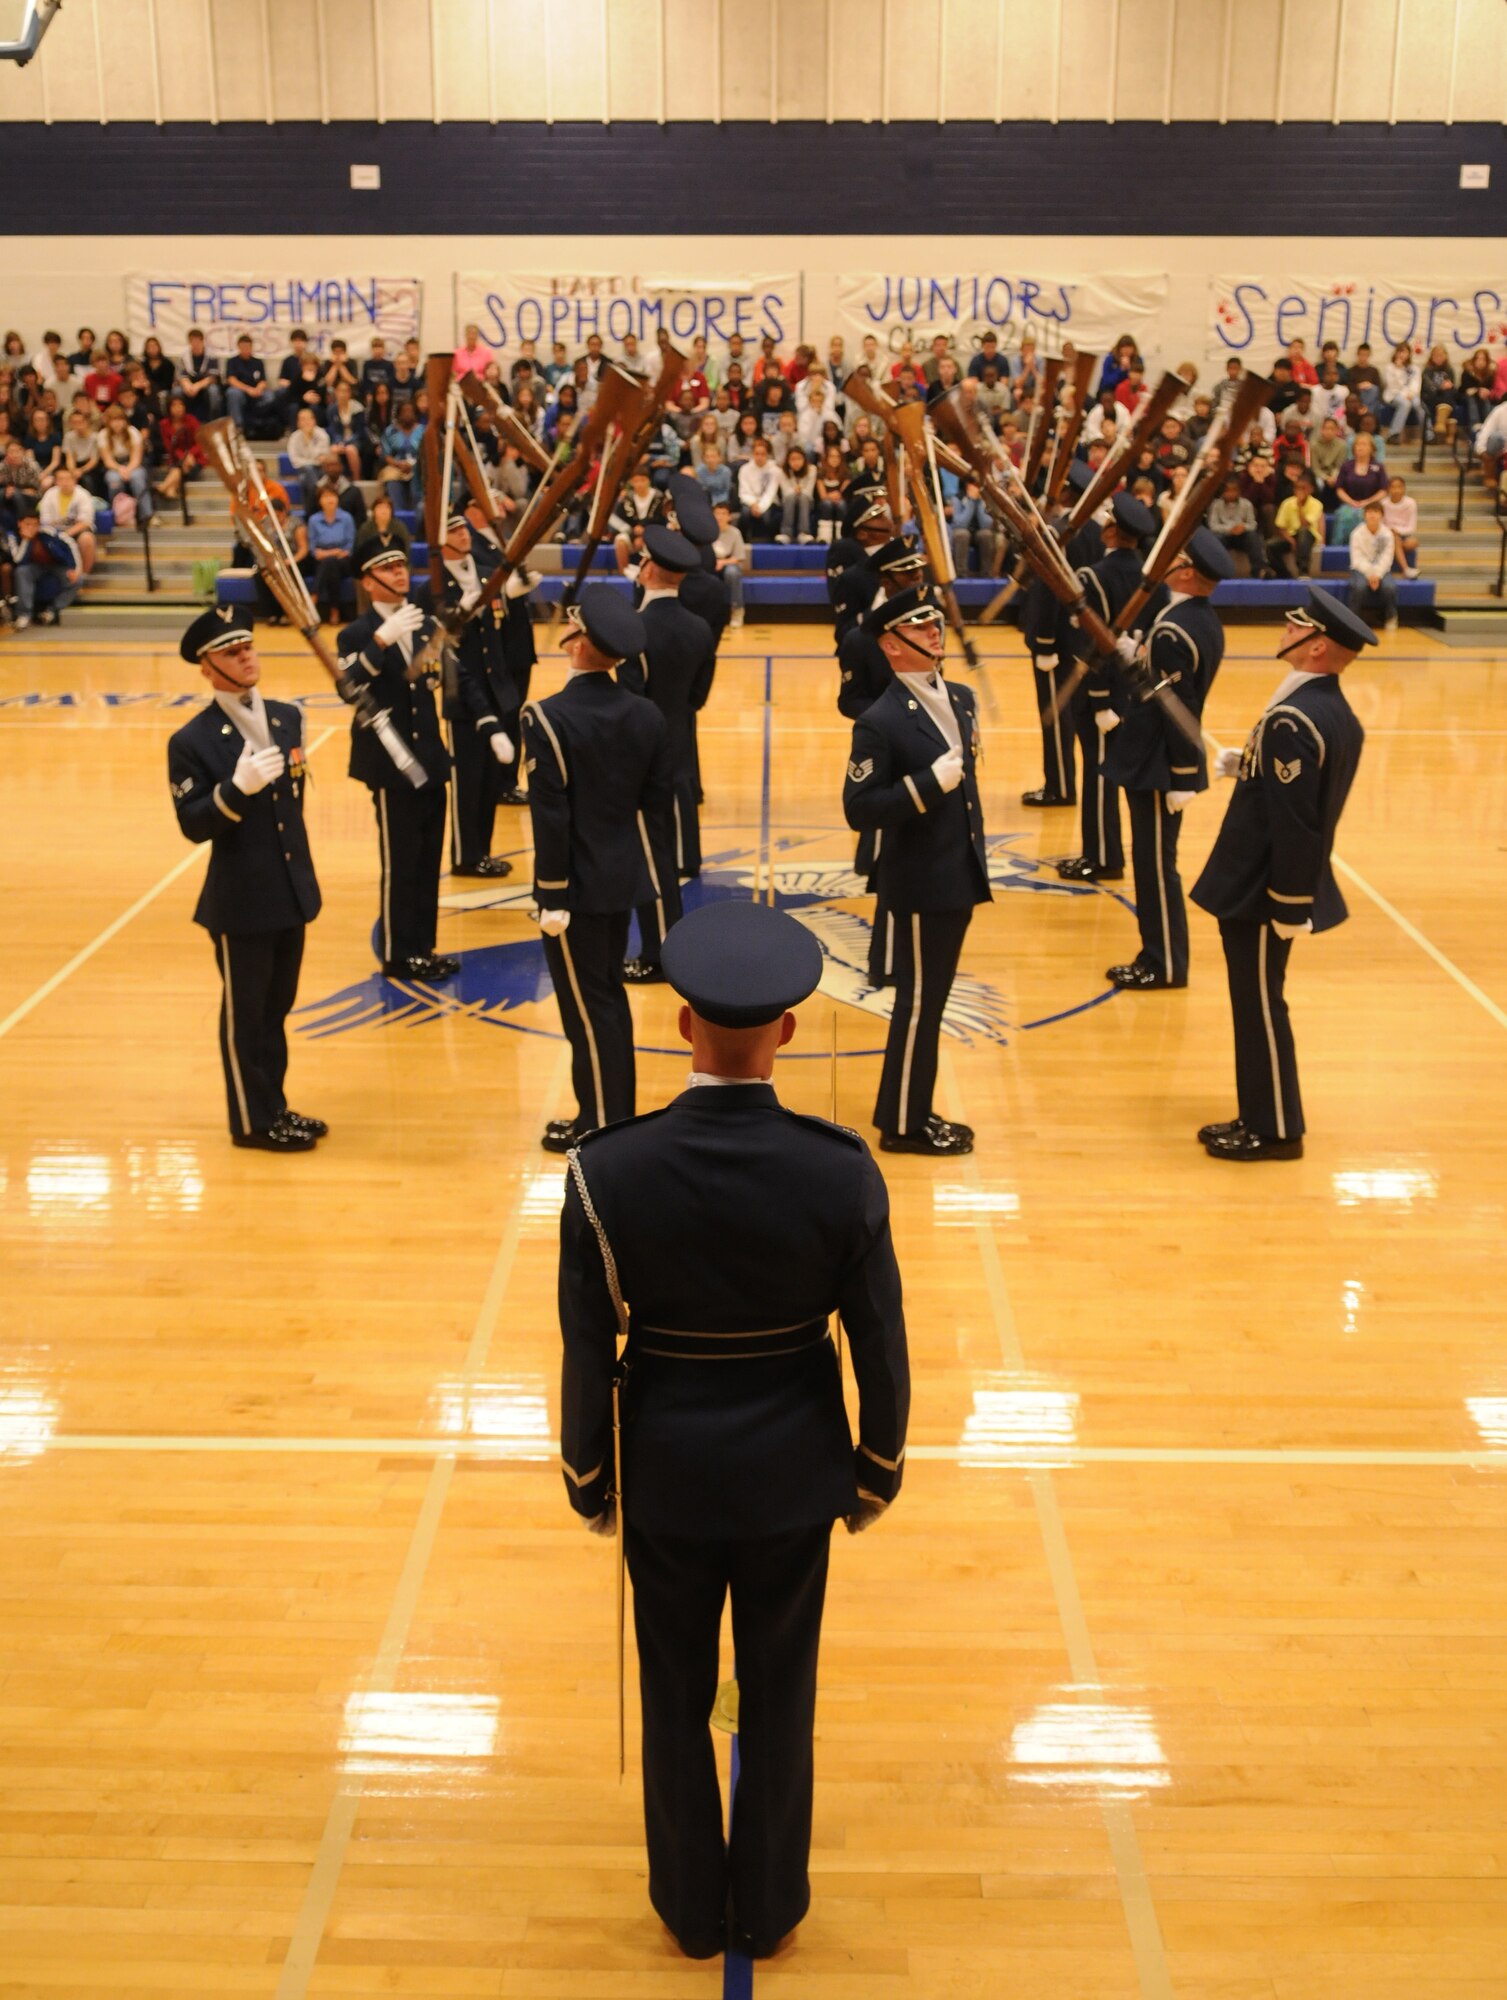 The United States Air Force Honor Guard Drill Team performs for students at Randolph Air Force Base, Texas, Nov. 2.  The Drill Team tours worldwide representing all Airmen while showcasing Air Force precision and professionalism and personifying the integrity, discipline, and teamwork of every Airman and every Air Force mission. During the Air Force Honor Guard's 60-year history, their traveling component, the Drill Team, has performed in every state of the union and many countries abroad. (U.S. Air Force photo by Senior Airman Sean Adams)